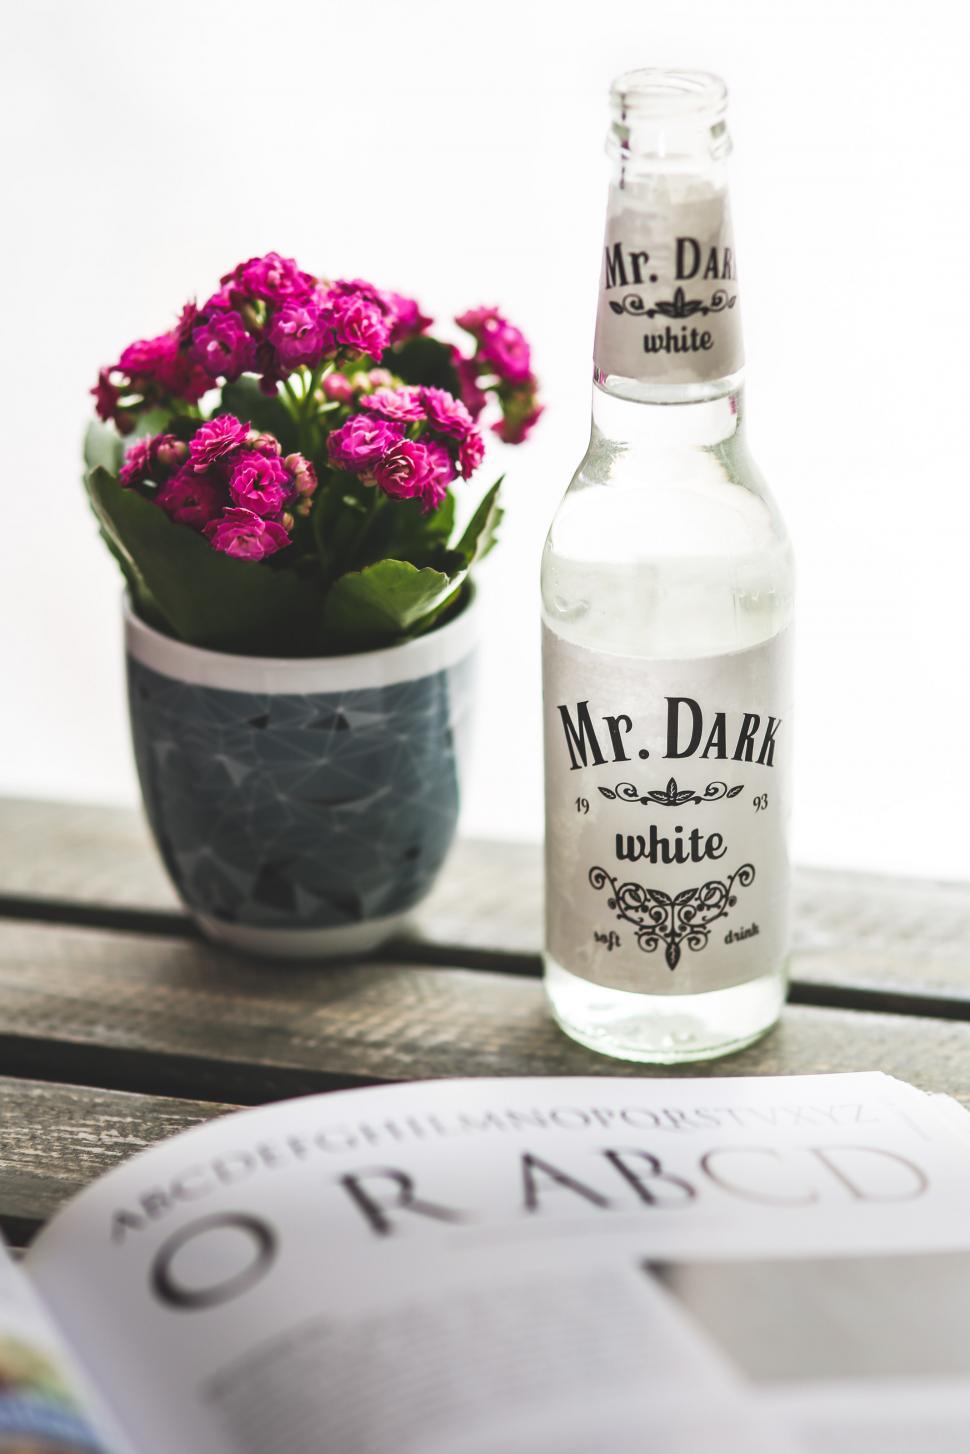 Free Image of Bottle of Mr Dark White Next to Potted Plant 